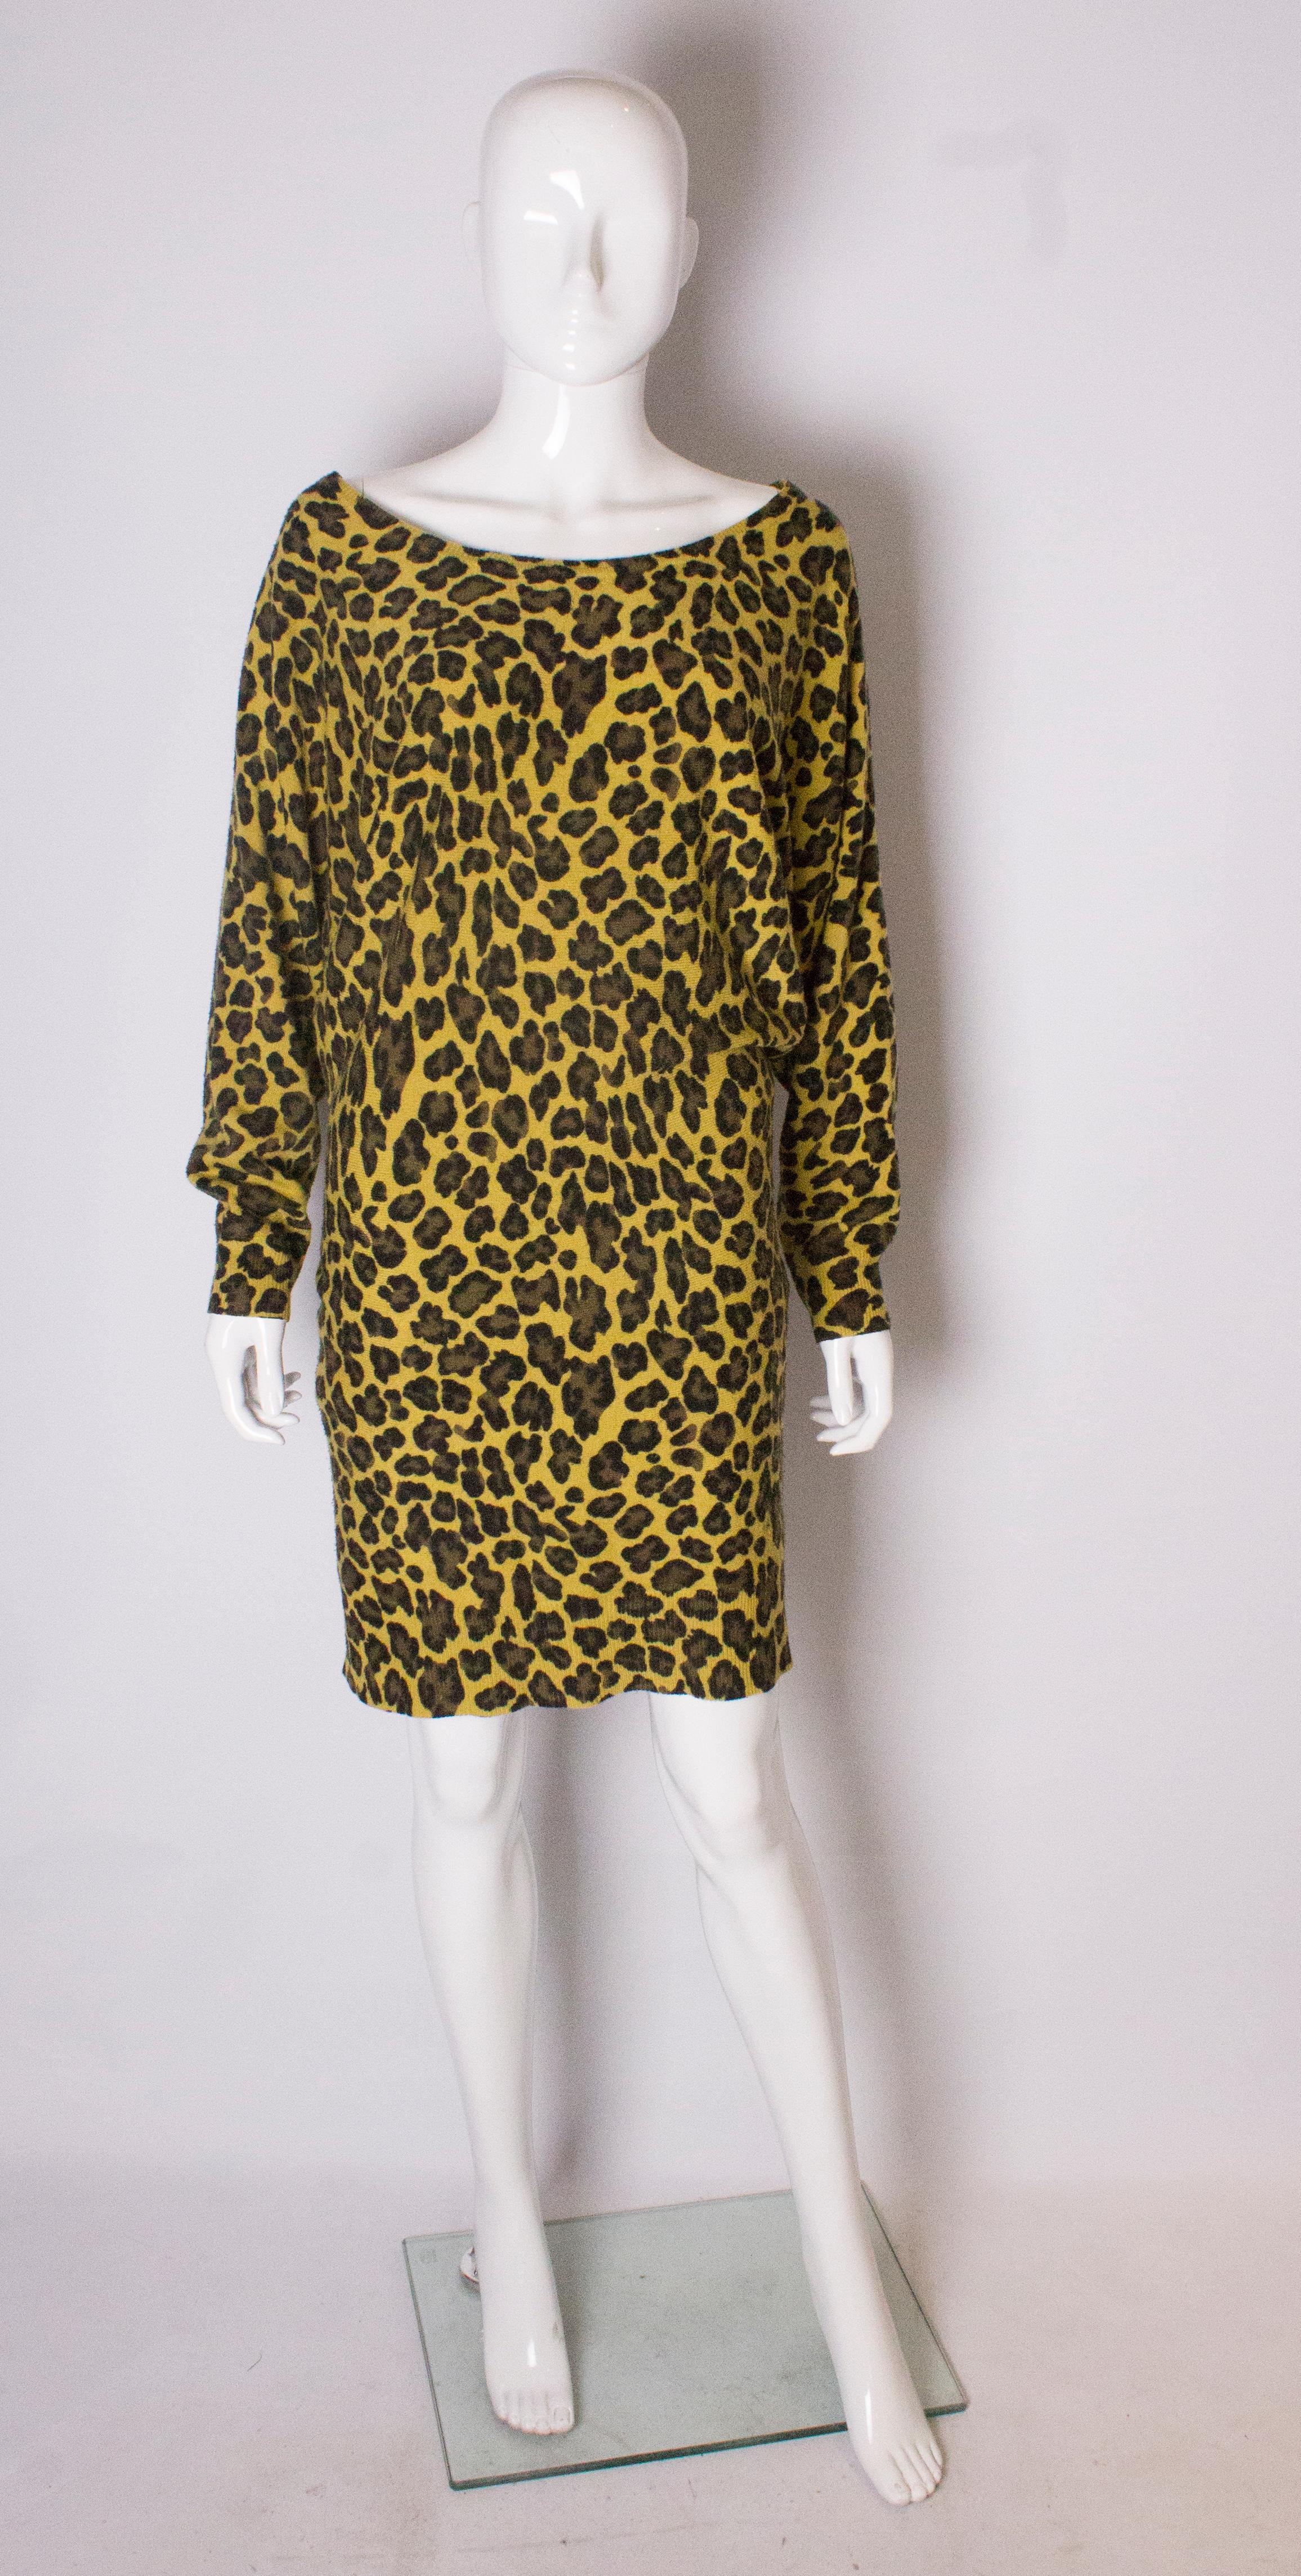 A great dress for Fall by Us designer Betsey Johnson.The sweater dress has a round neckline,and is in a mustard yellow background with an olive and brown animal print design. The sweaterdress has ribbed edges and batwing sleaves.